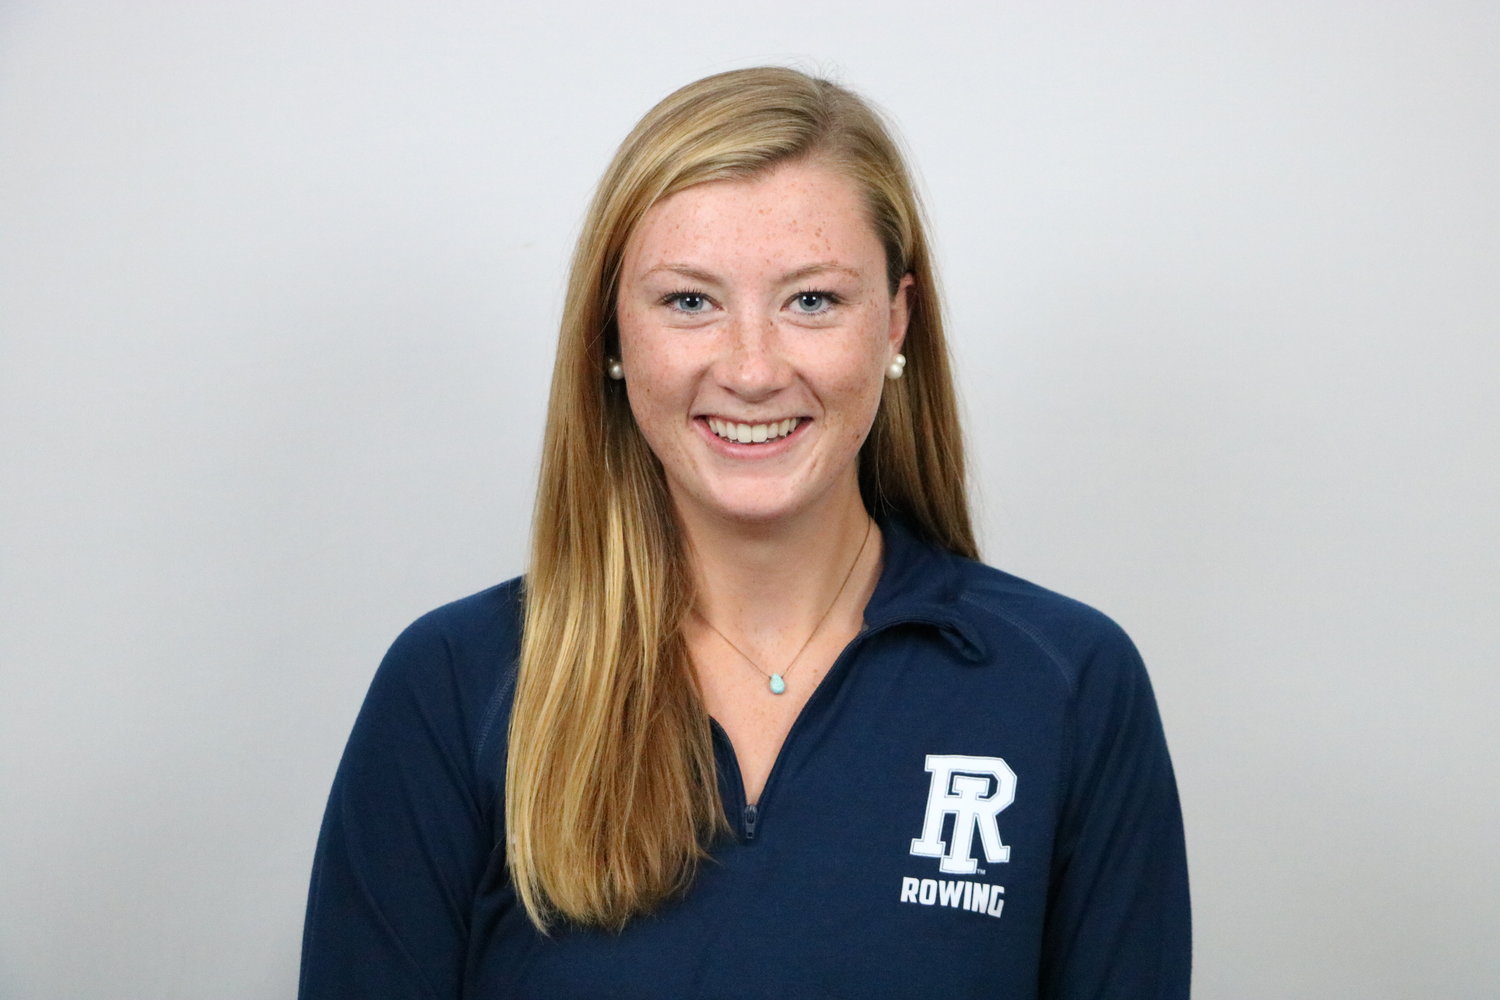 As a freshman, Julia Fortin rowed in the bow seat on URI’s Varsity 4 boat that placed 19th in its flight at the NCAA championships.